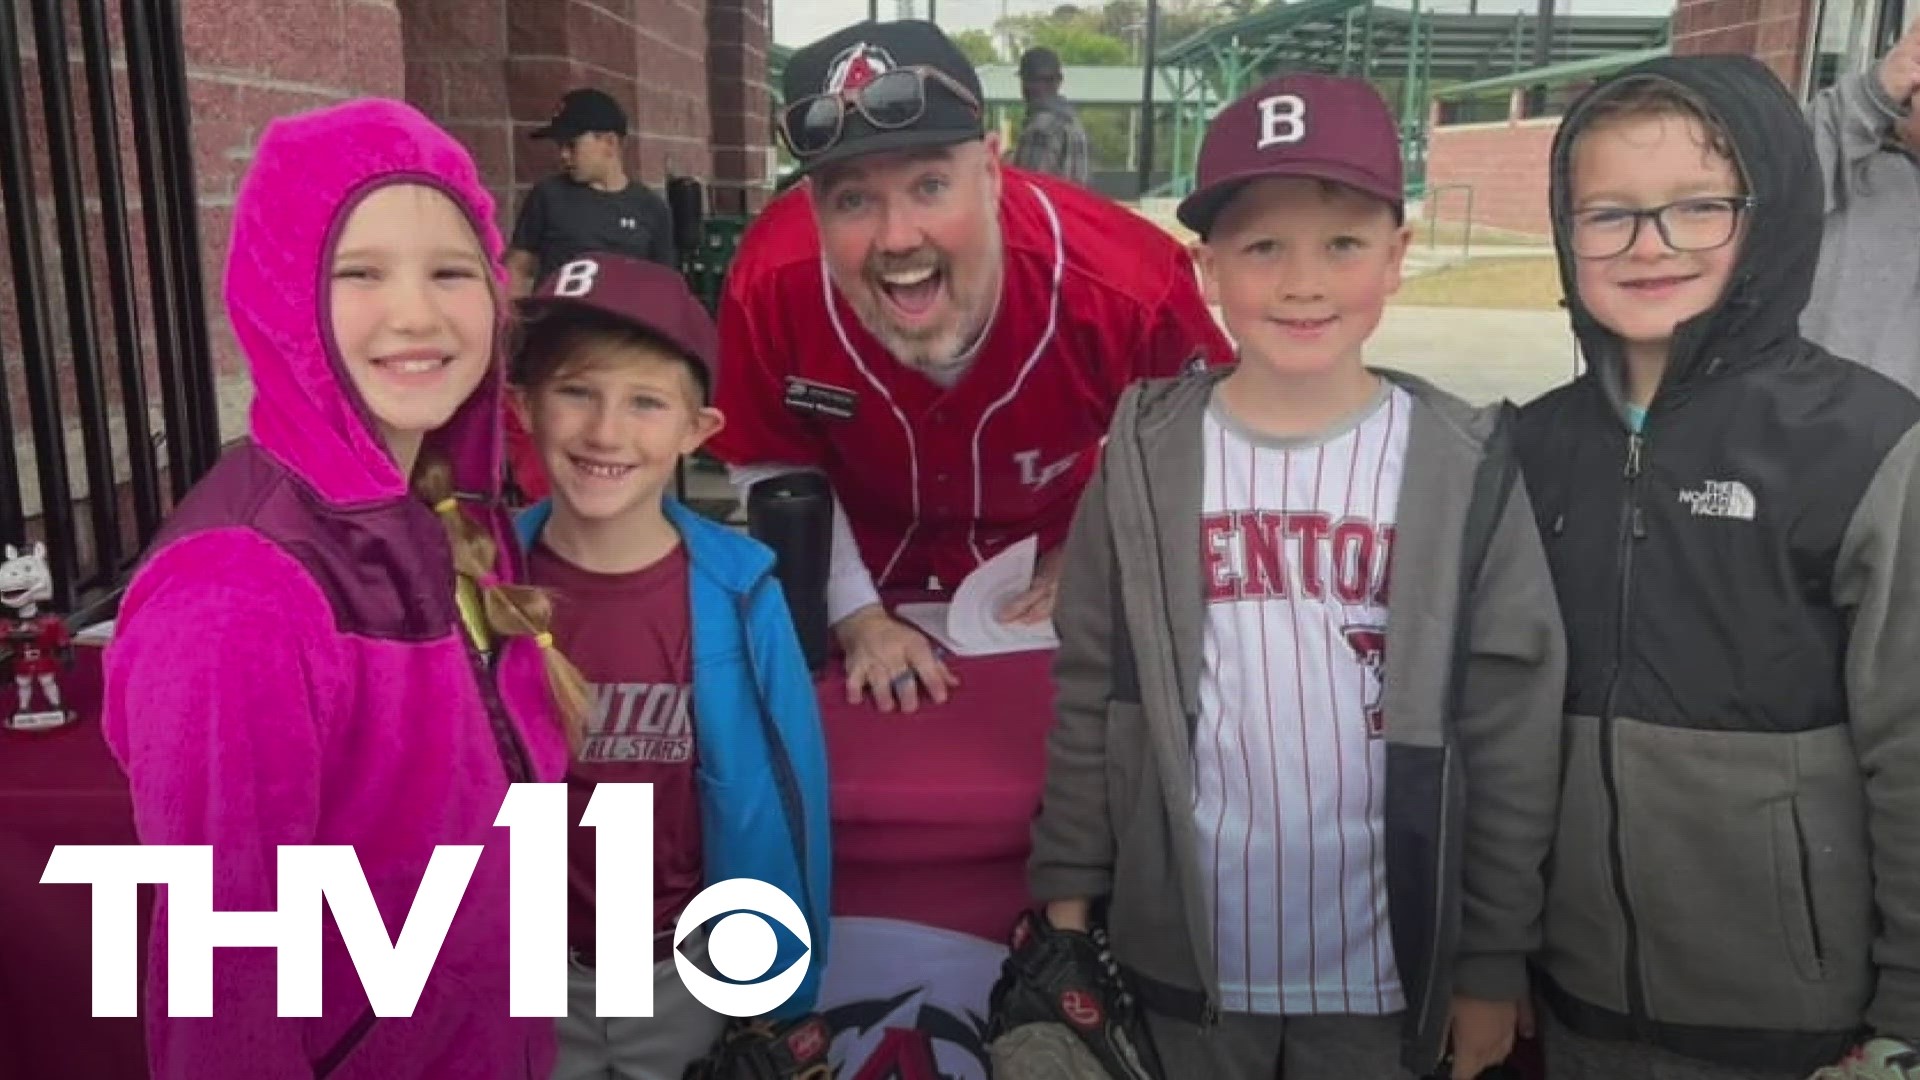 The Arkansas Travelers Youth Foundation started three years ago to help get more kids out to the ballpark by supporting youth & educational programs statewide.